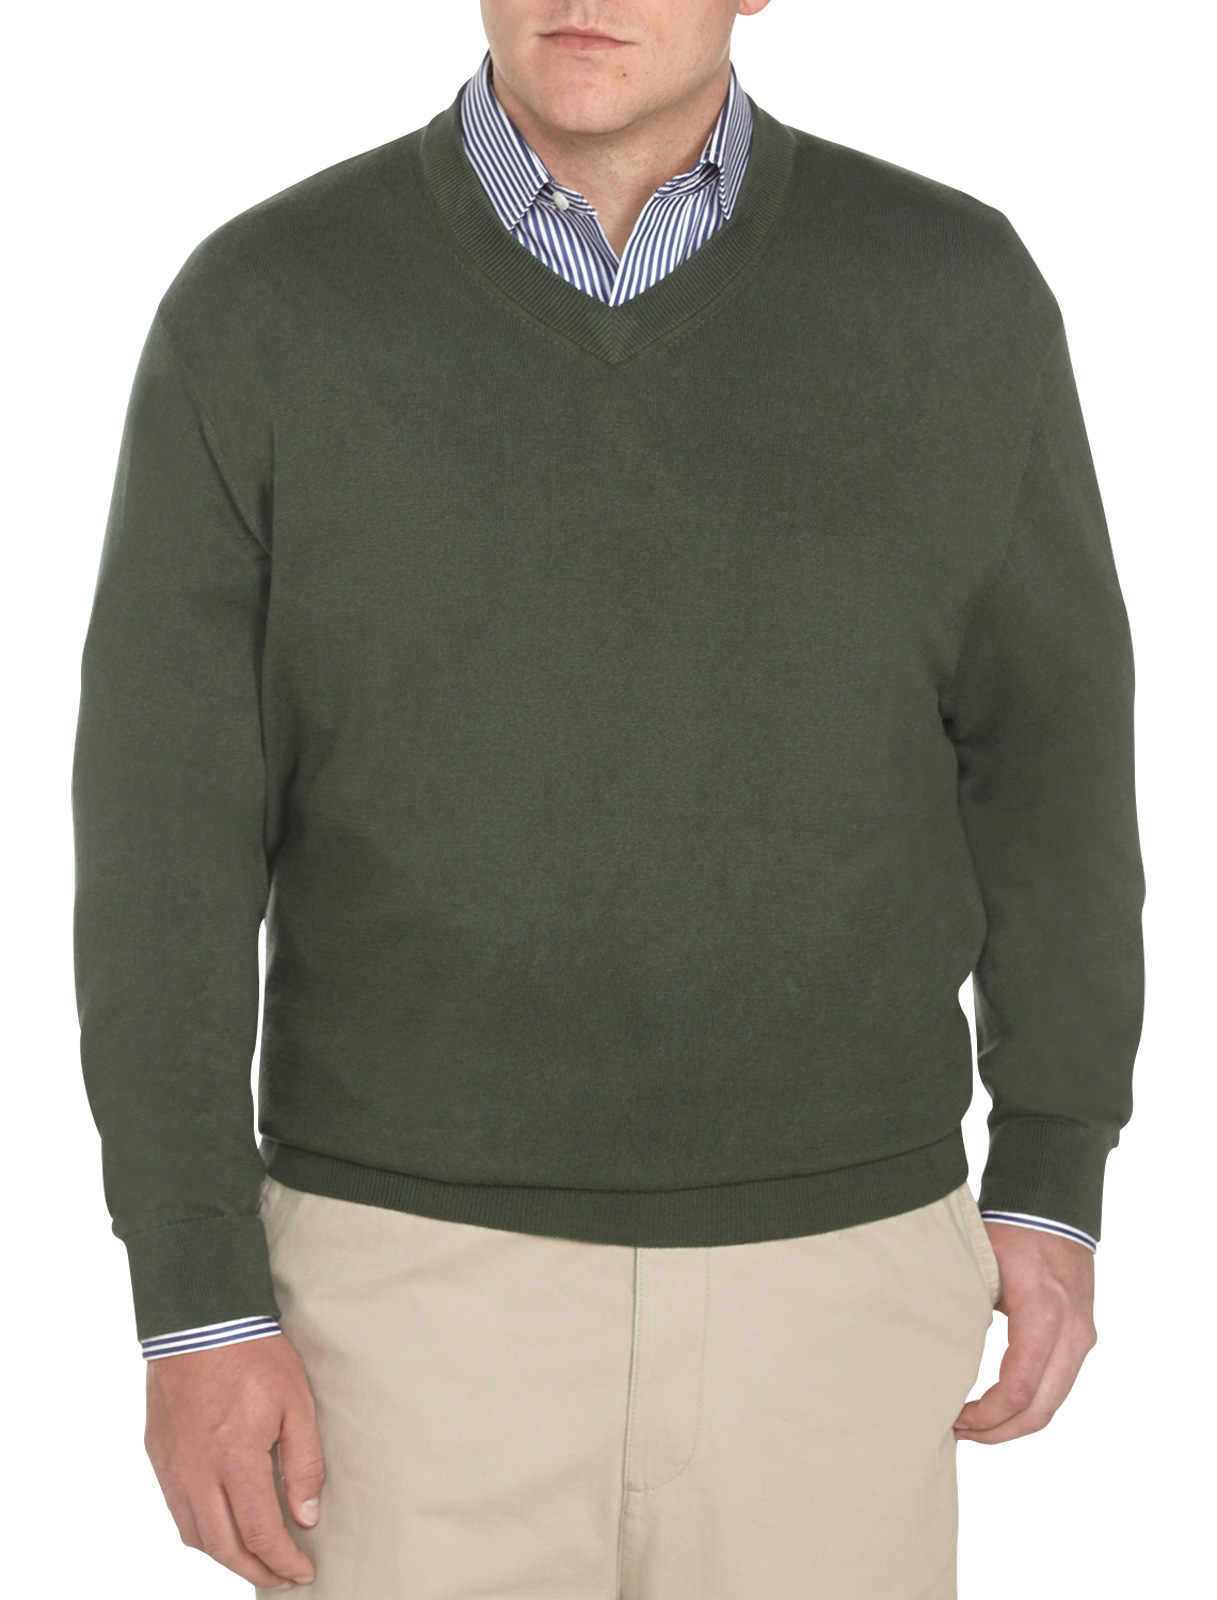 ROCHESTER Men's Big and Tall Cotton/Cashmere V-Neck Sweater